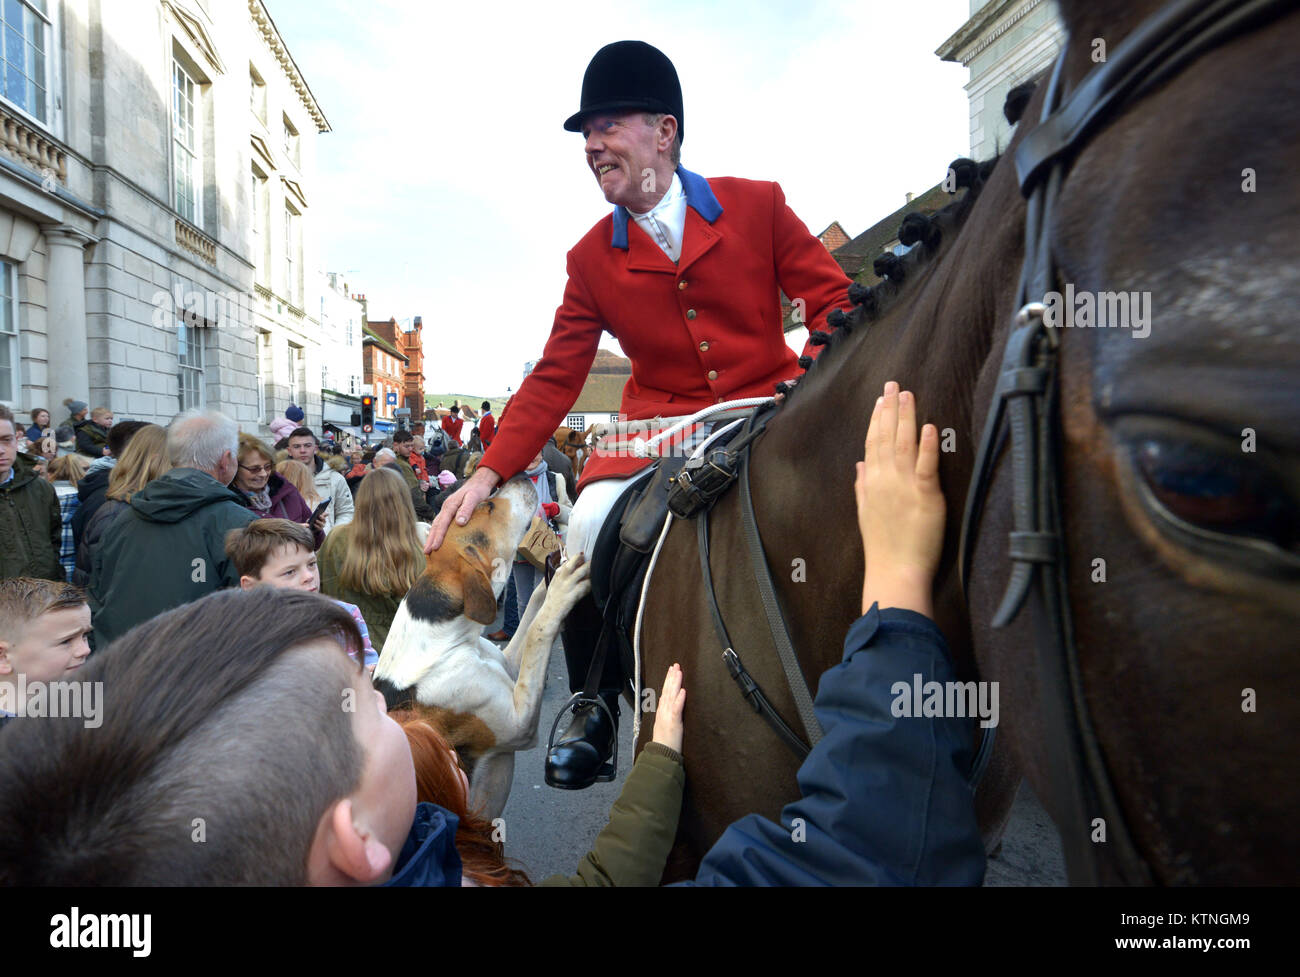 Lewes, East Sussex, UK. 26th December 2017. Hundreds of people watch the traditional Southdown and Eridge hunt Boxing Day meeting in Lewes High Street. A small handfull of anti-hunt demonstraters stood in front of the hounds and horses as they left for a drag hunt on the South Downs. Angry words were exchanged but the event remained peaceful. © Peter Cripps/Alamy Live News Stock Photo